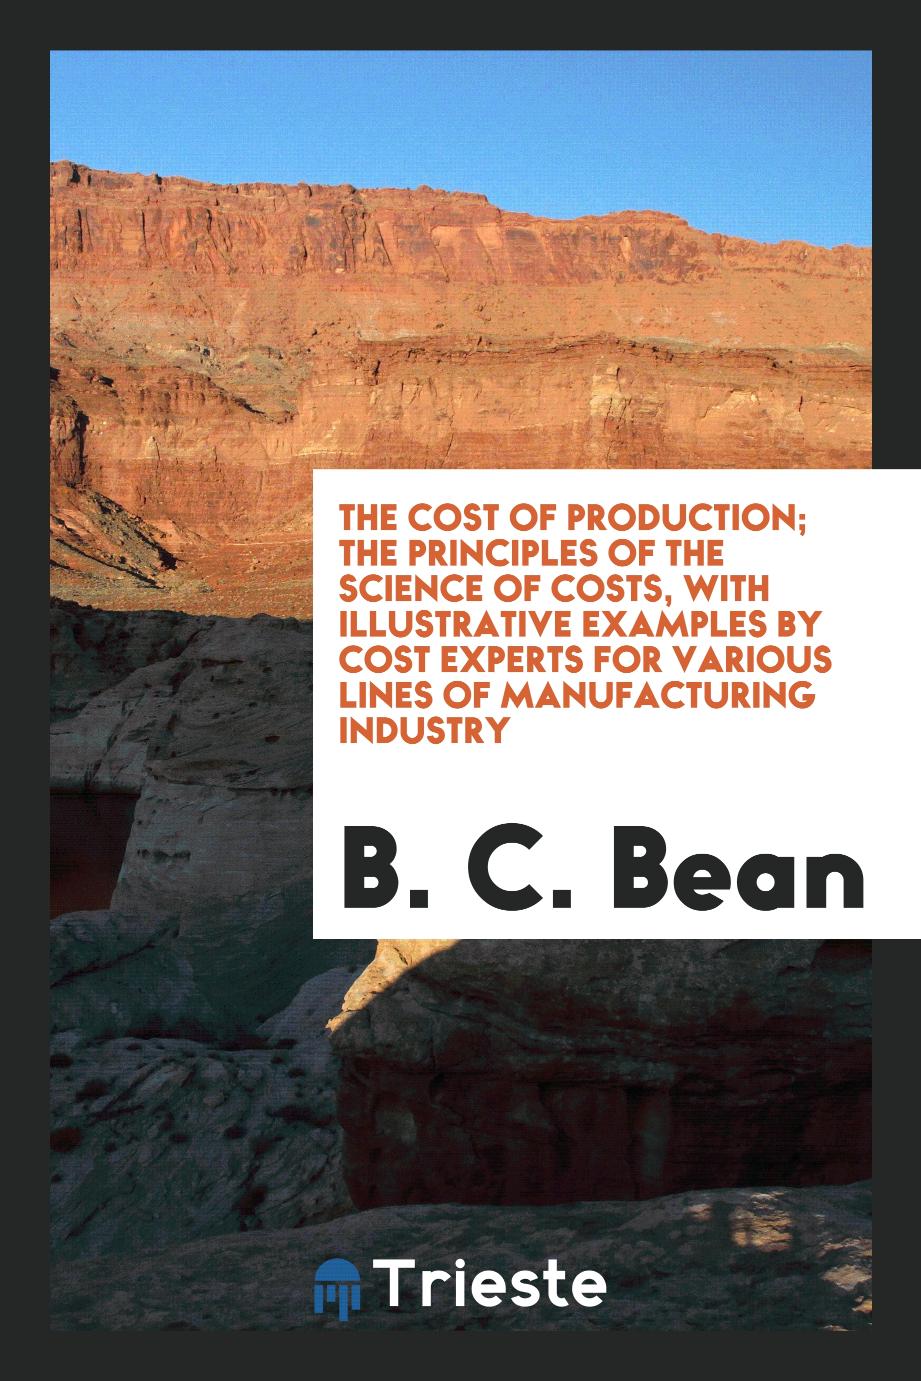 B. C. Bean - The Cost of Production; The Principles of the Science of Costs, with Illustrative Examples by Cost Experts for Various Lines of Manufacturing Industry